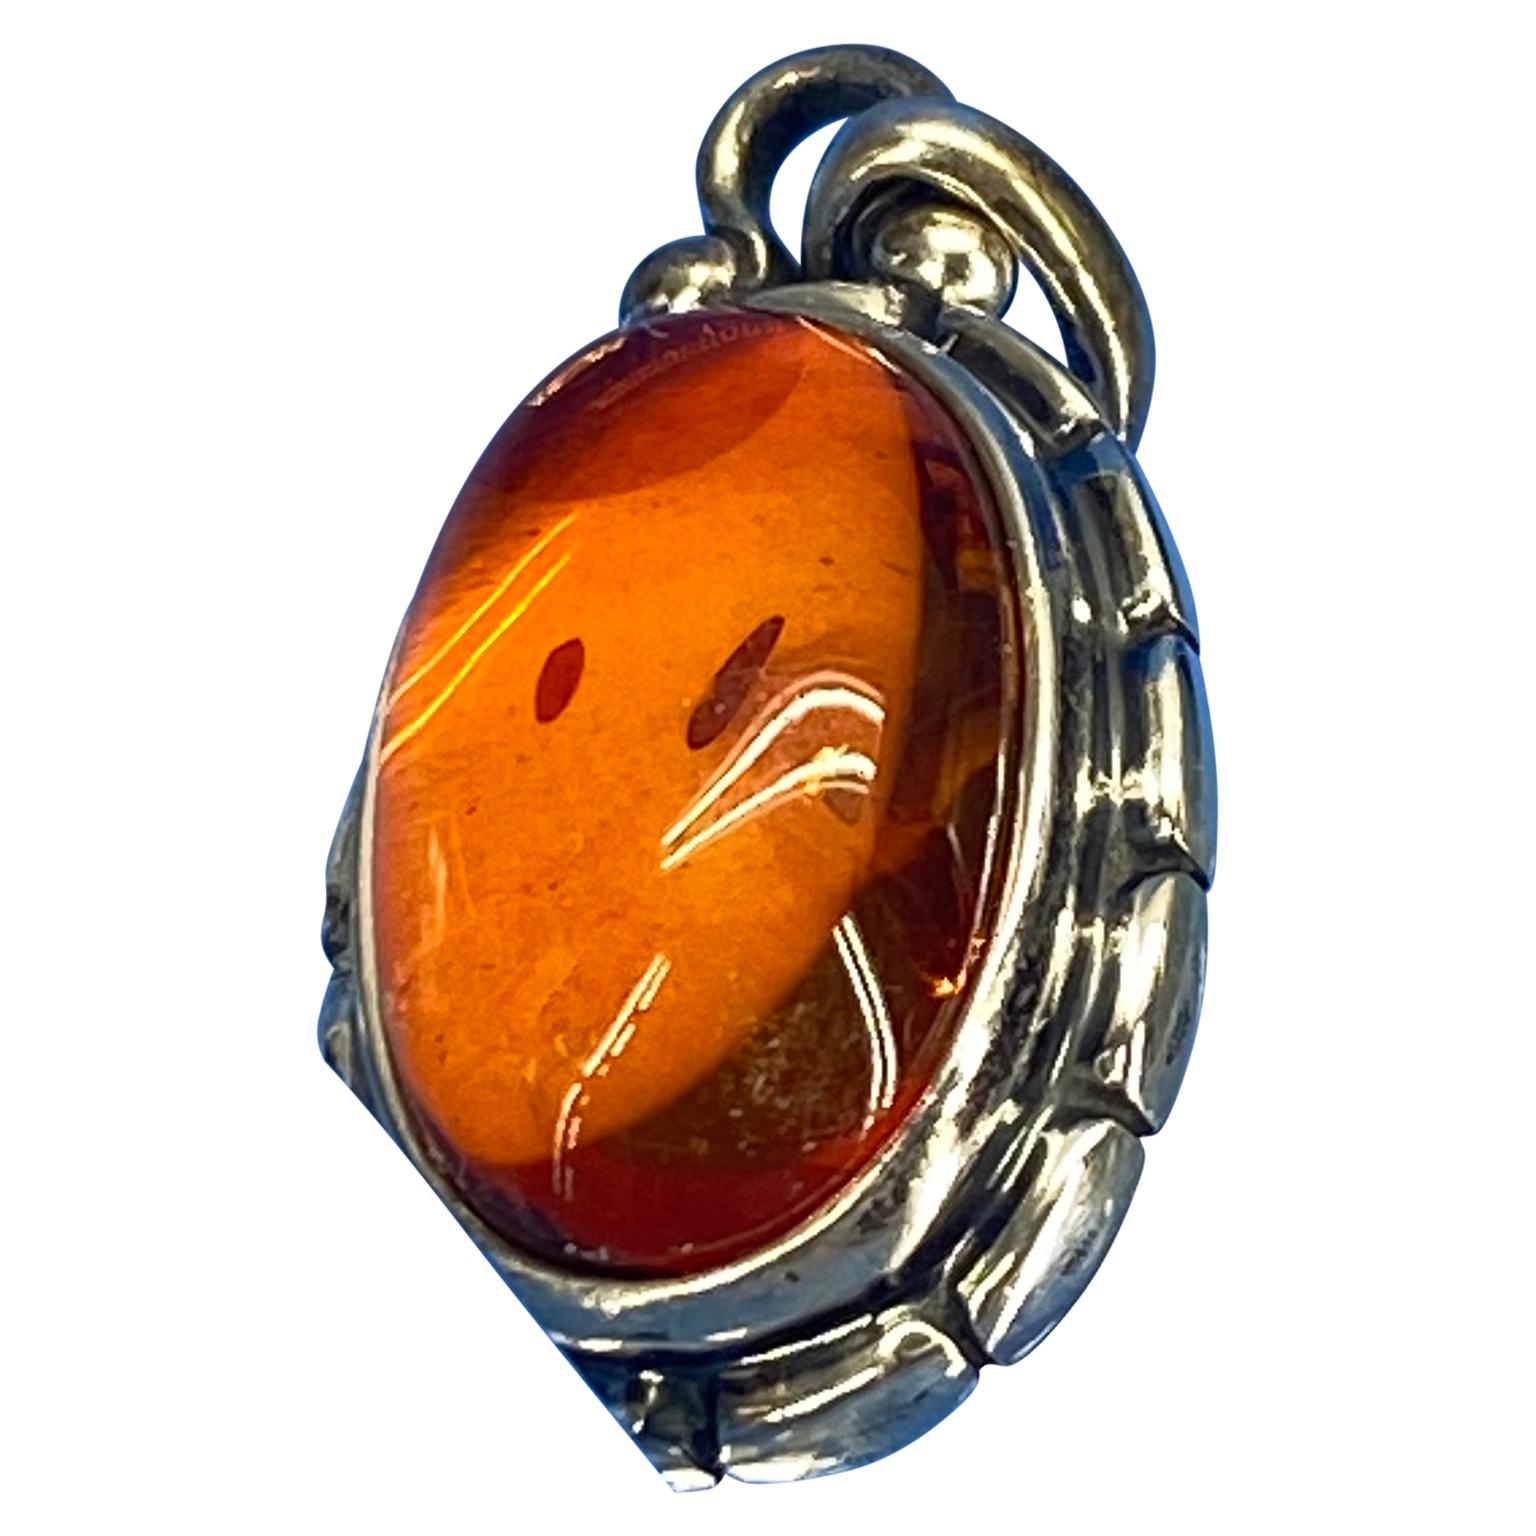 Georg Jensen annual pendant in sterling silver with amber stone, 2001. Pendant measures 2.4 cm and pendant measures 12 grams (0.40 oz).